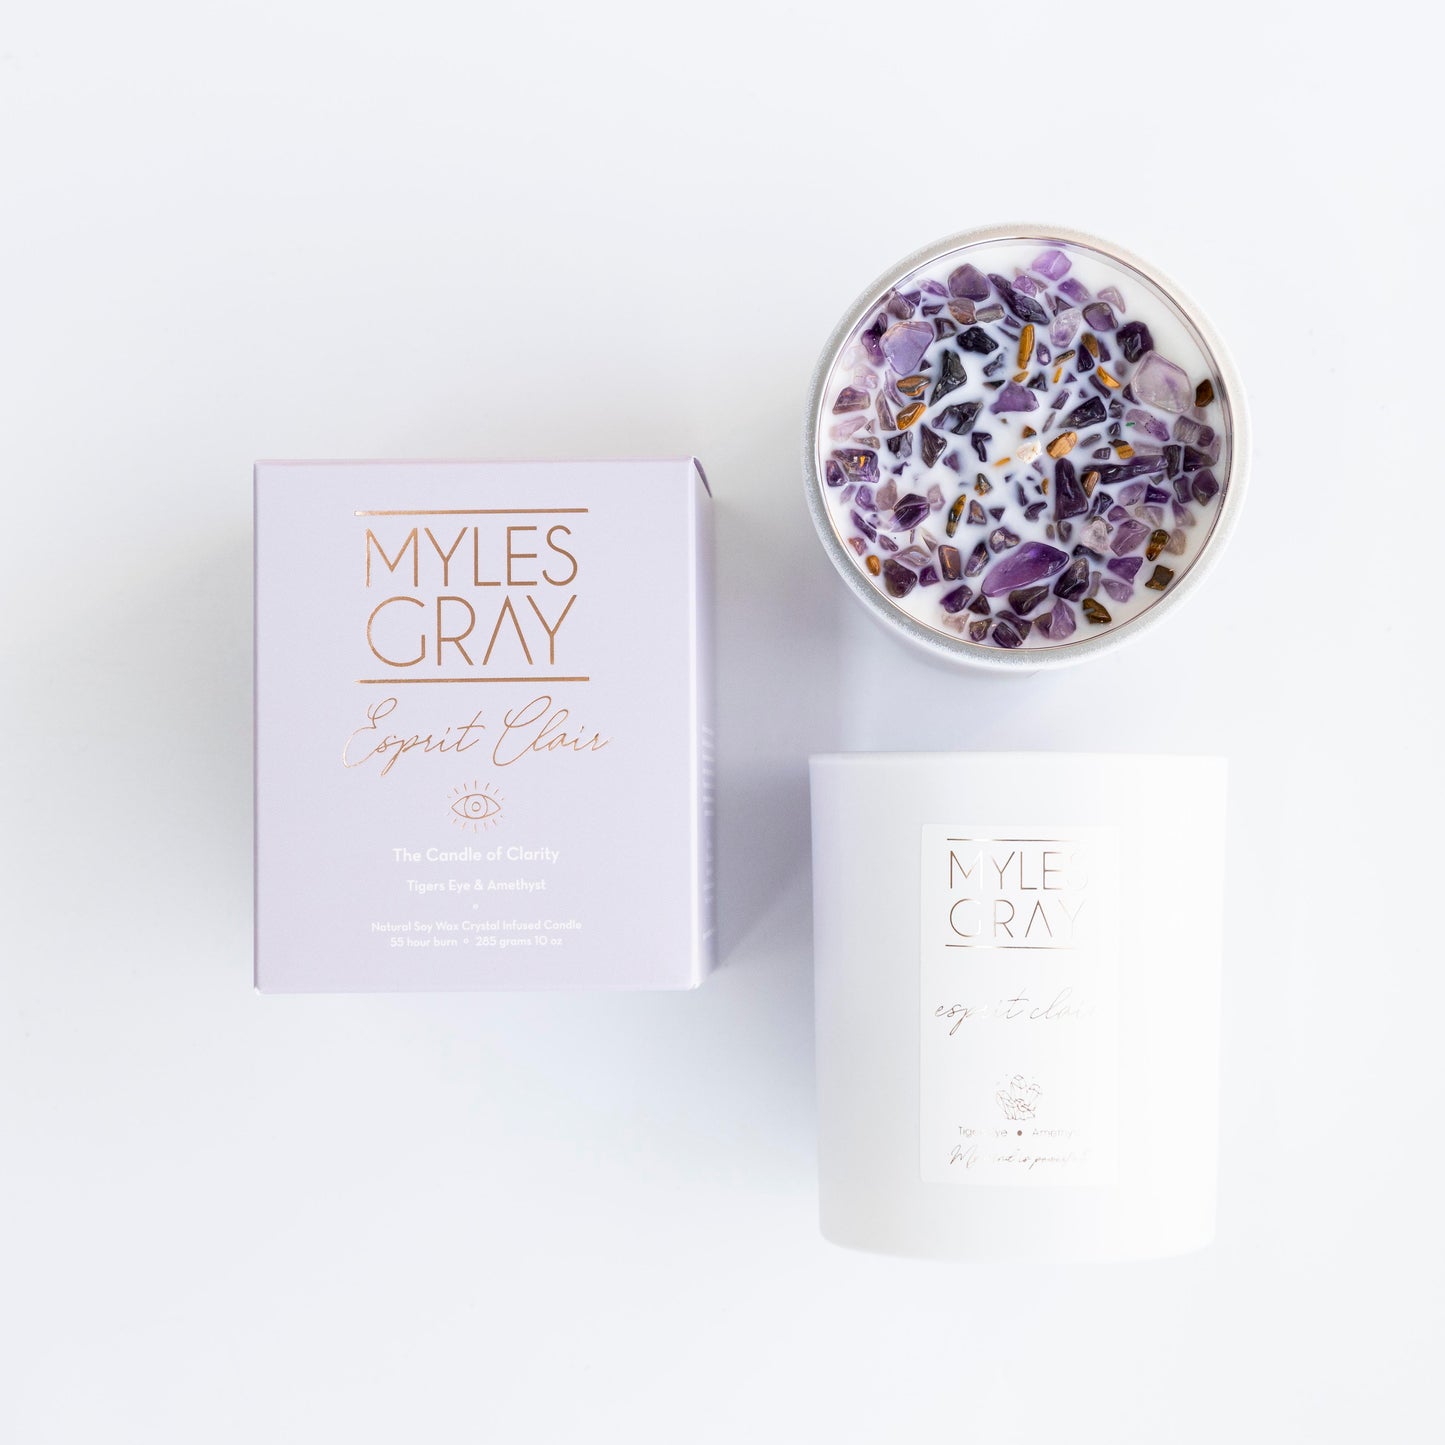 Myles Gray Esprit Clair Candle Of Clarity